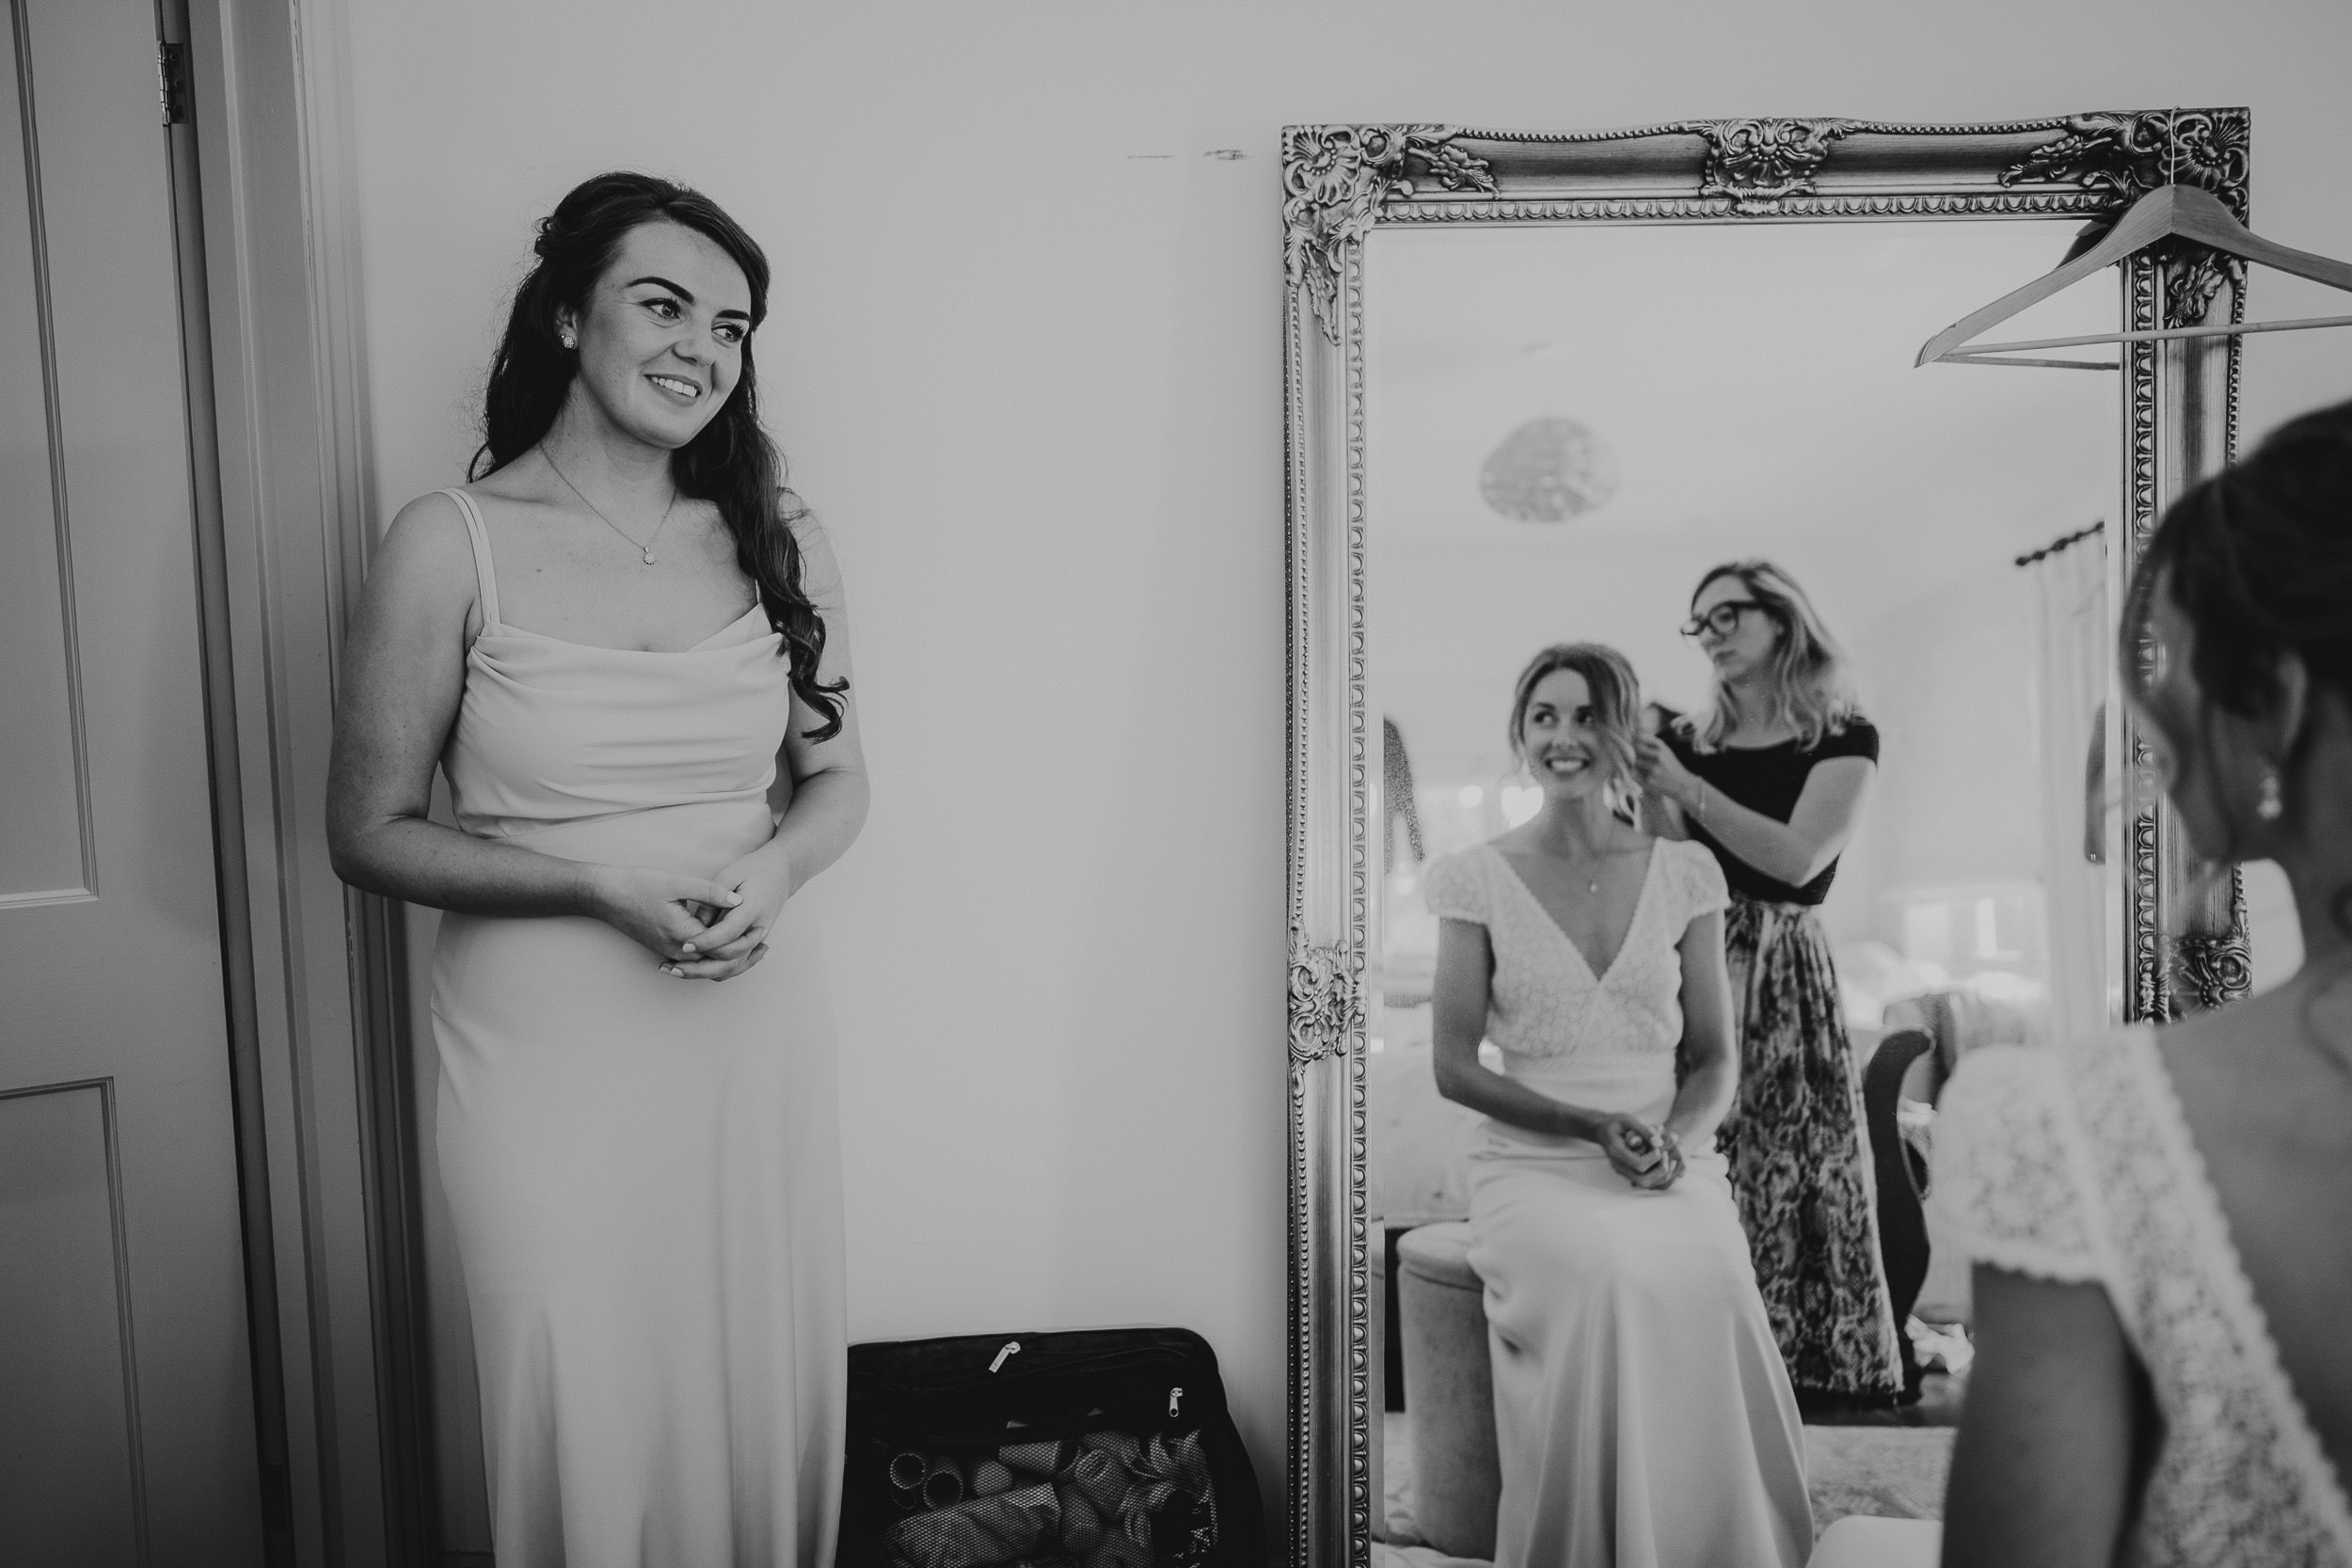 A bride preparing for her wedding, captured by a wedding photographer.